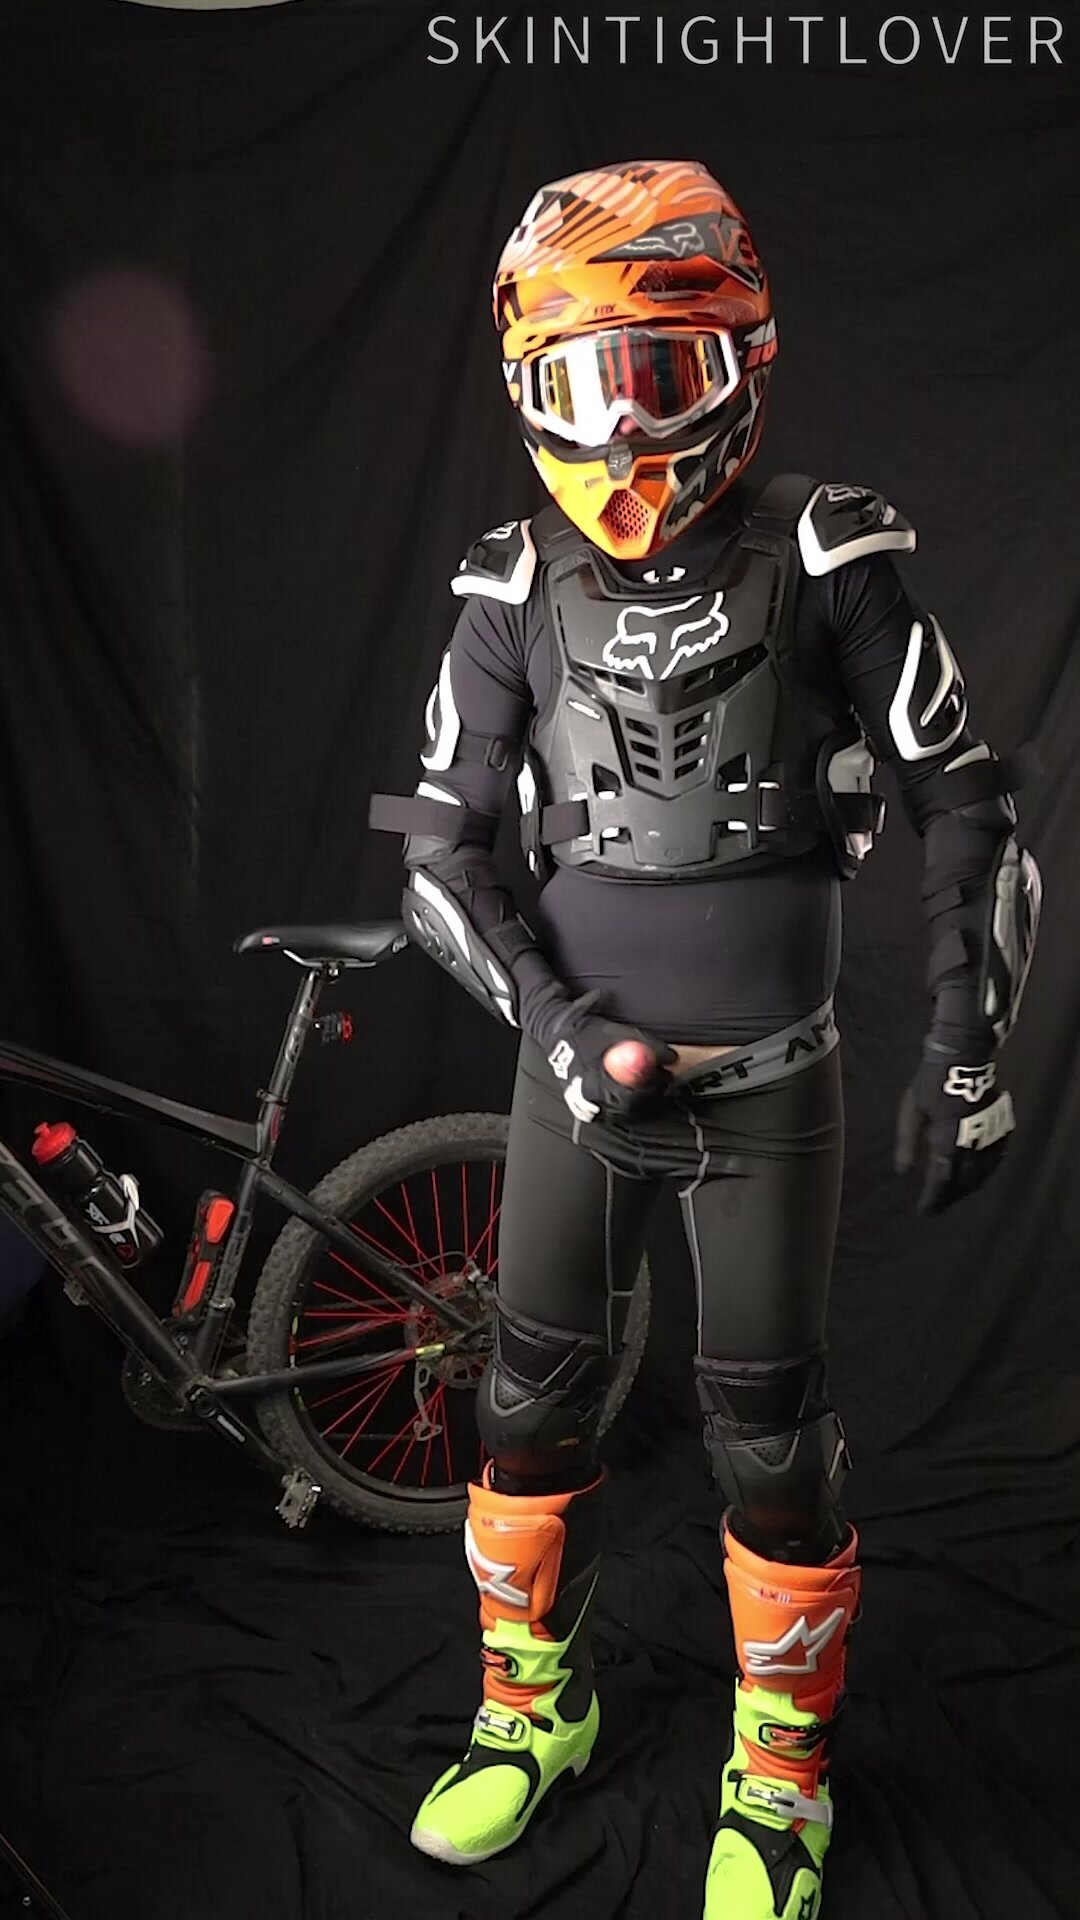 Wanking over bike in MX protectors and lycra